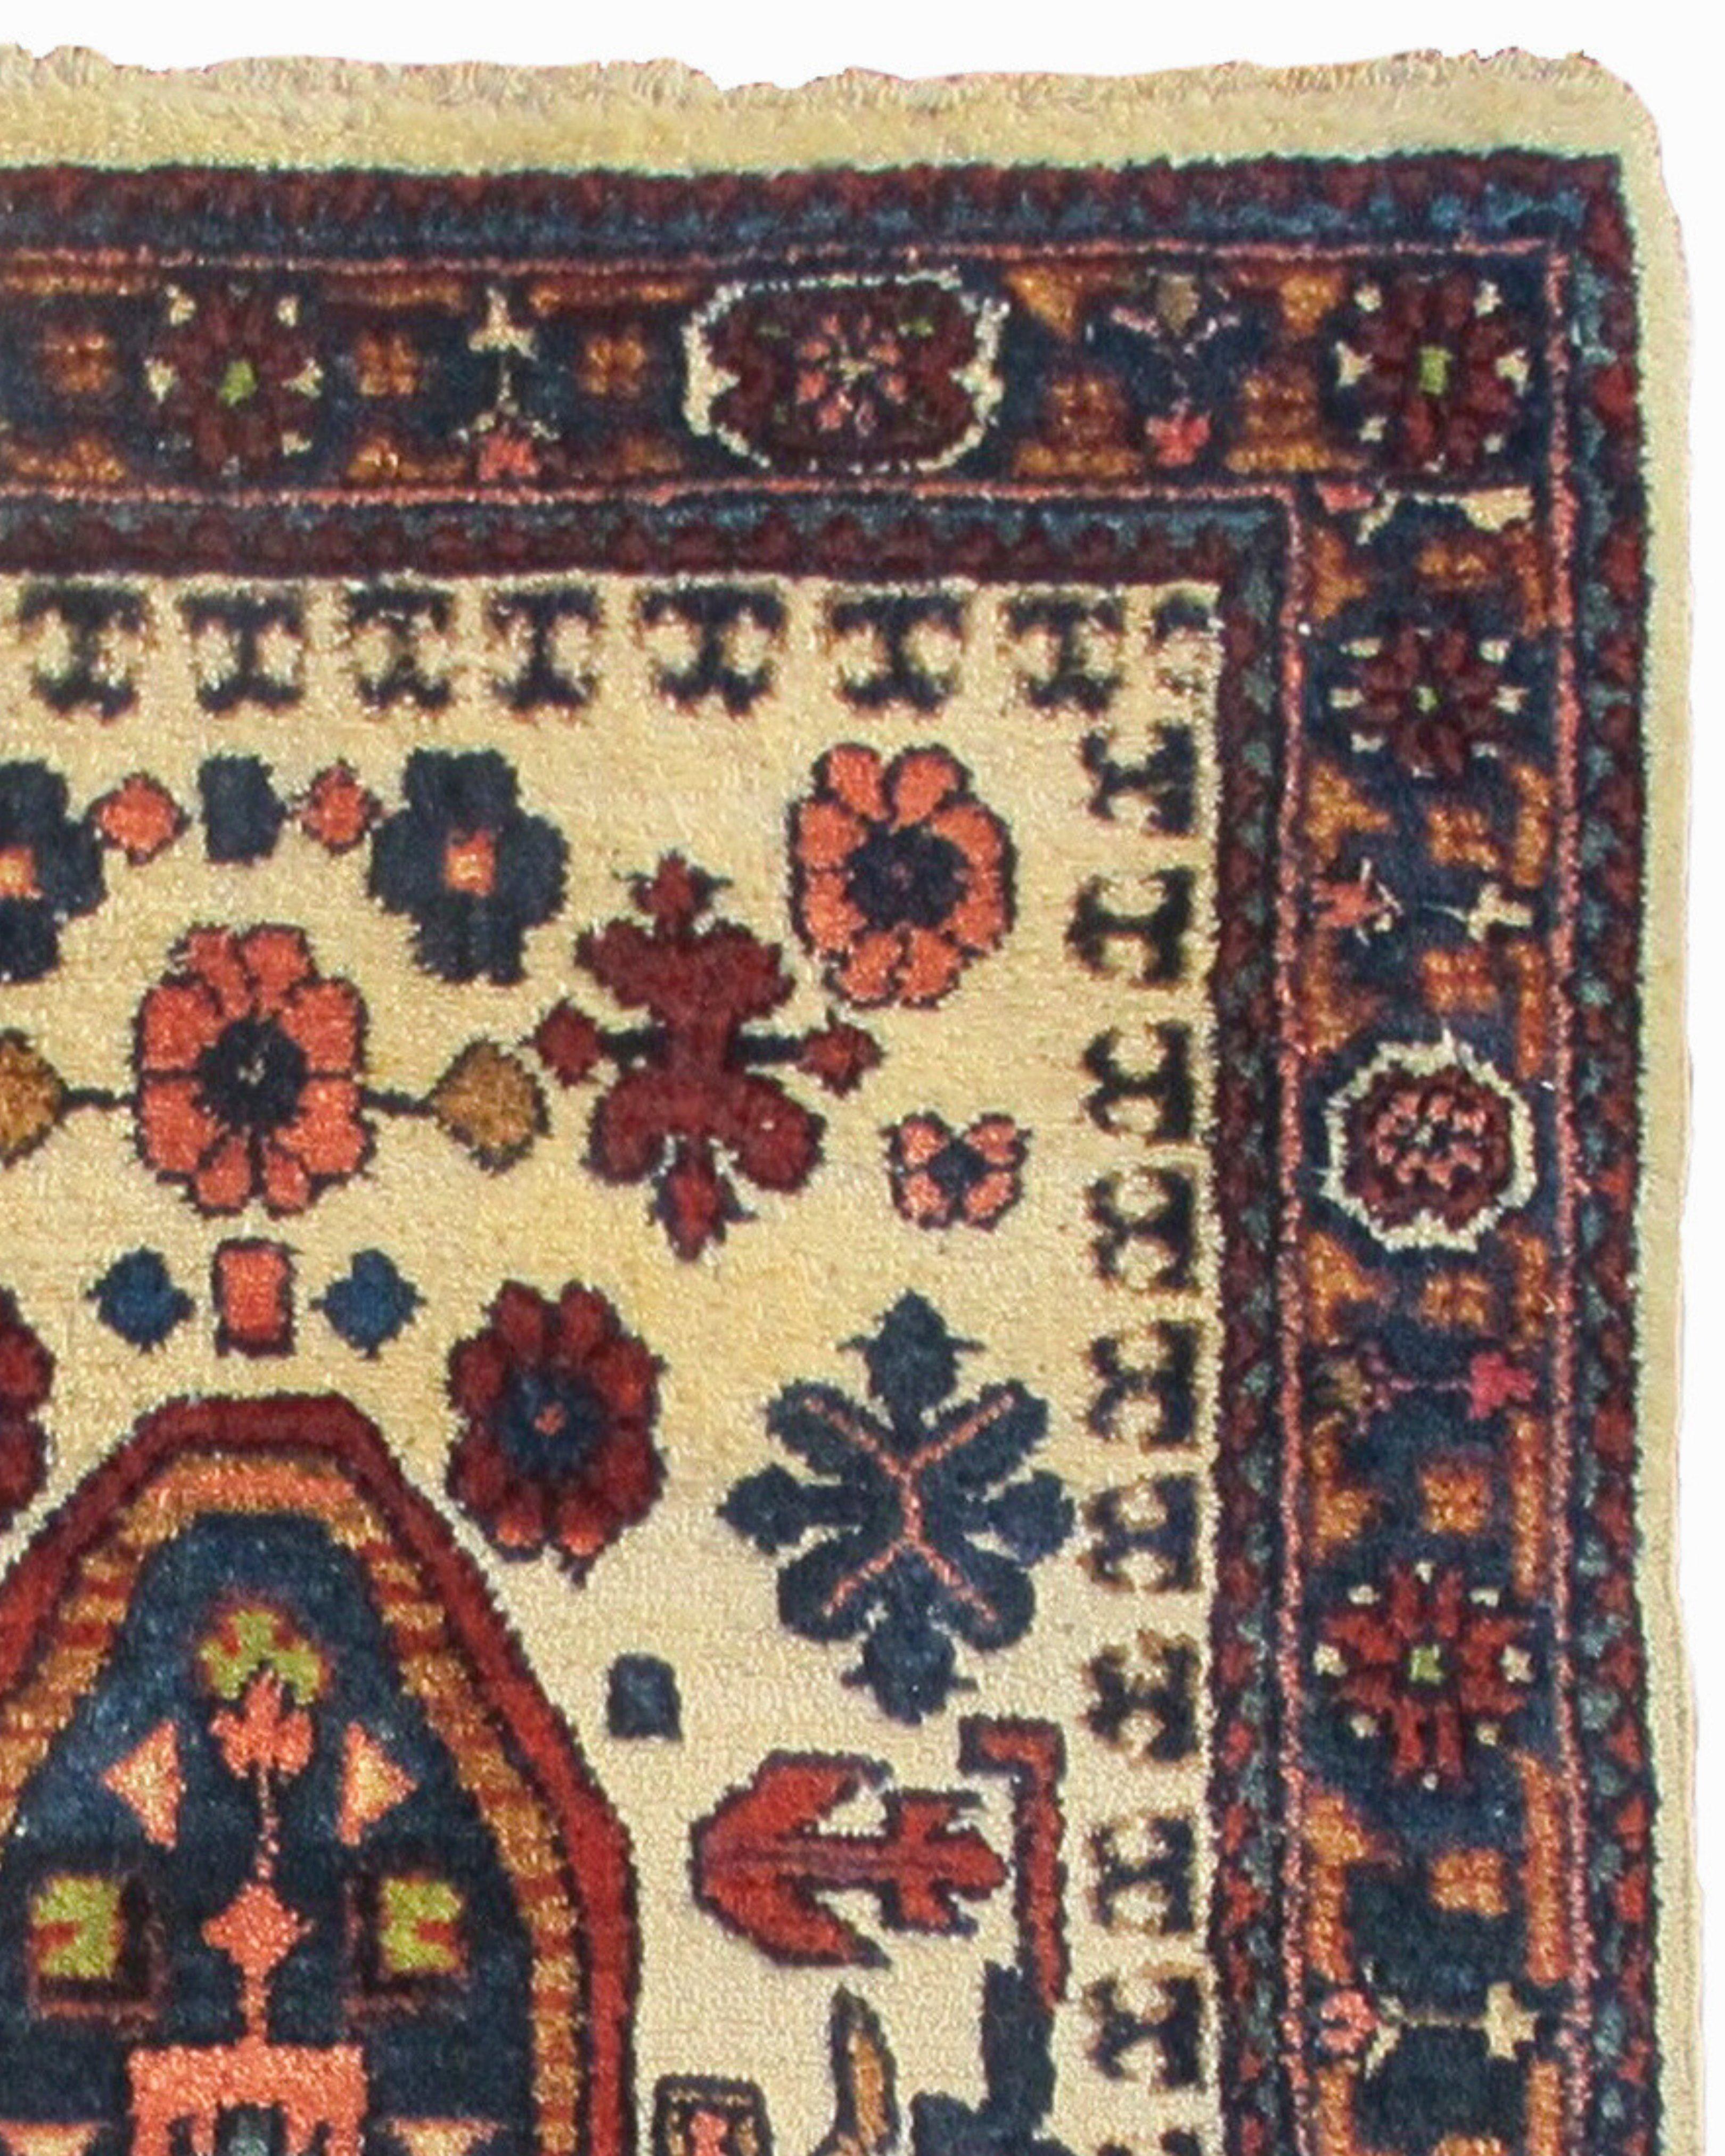 Antique Bibikabad Rug Mat, Early 20th Century

Additional information: 
Dimension: 2'8